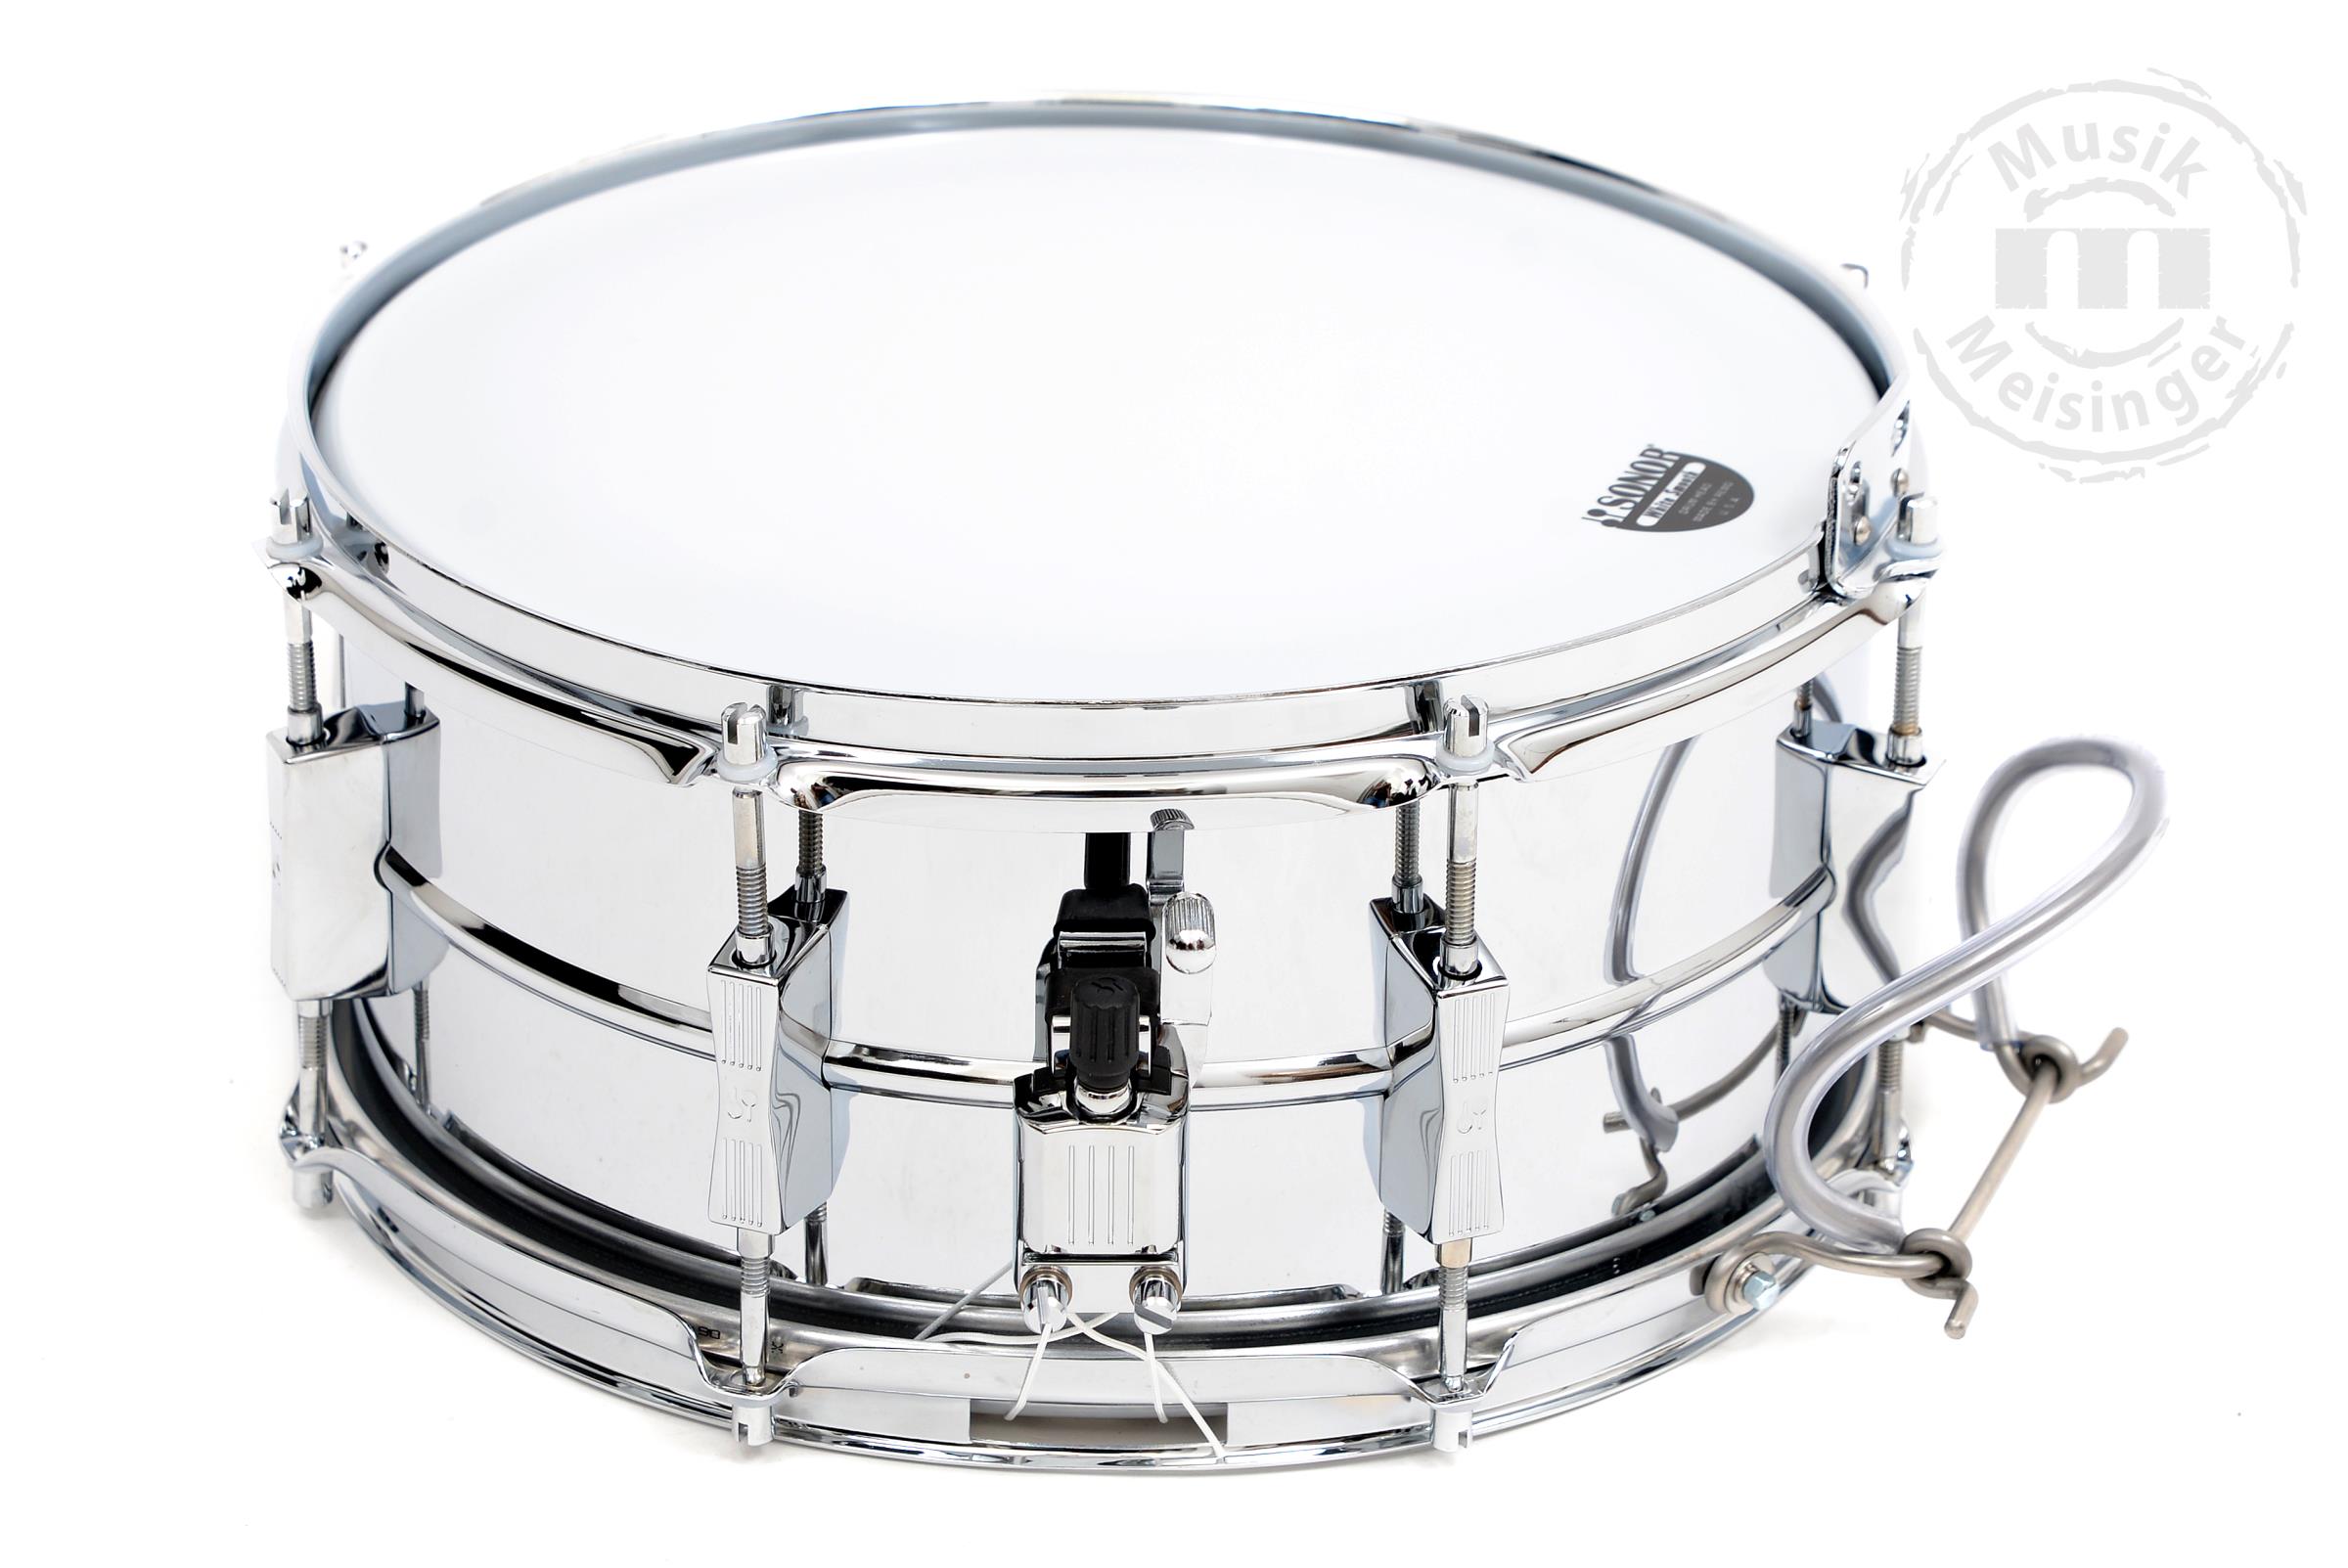 Sonor MP456 Marching Snare Drum